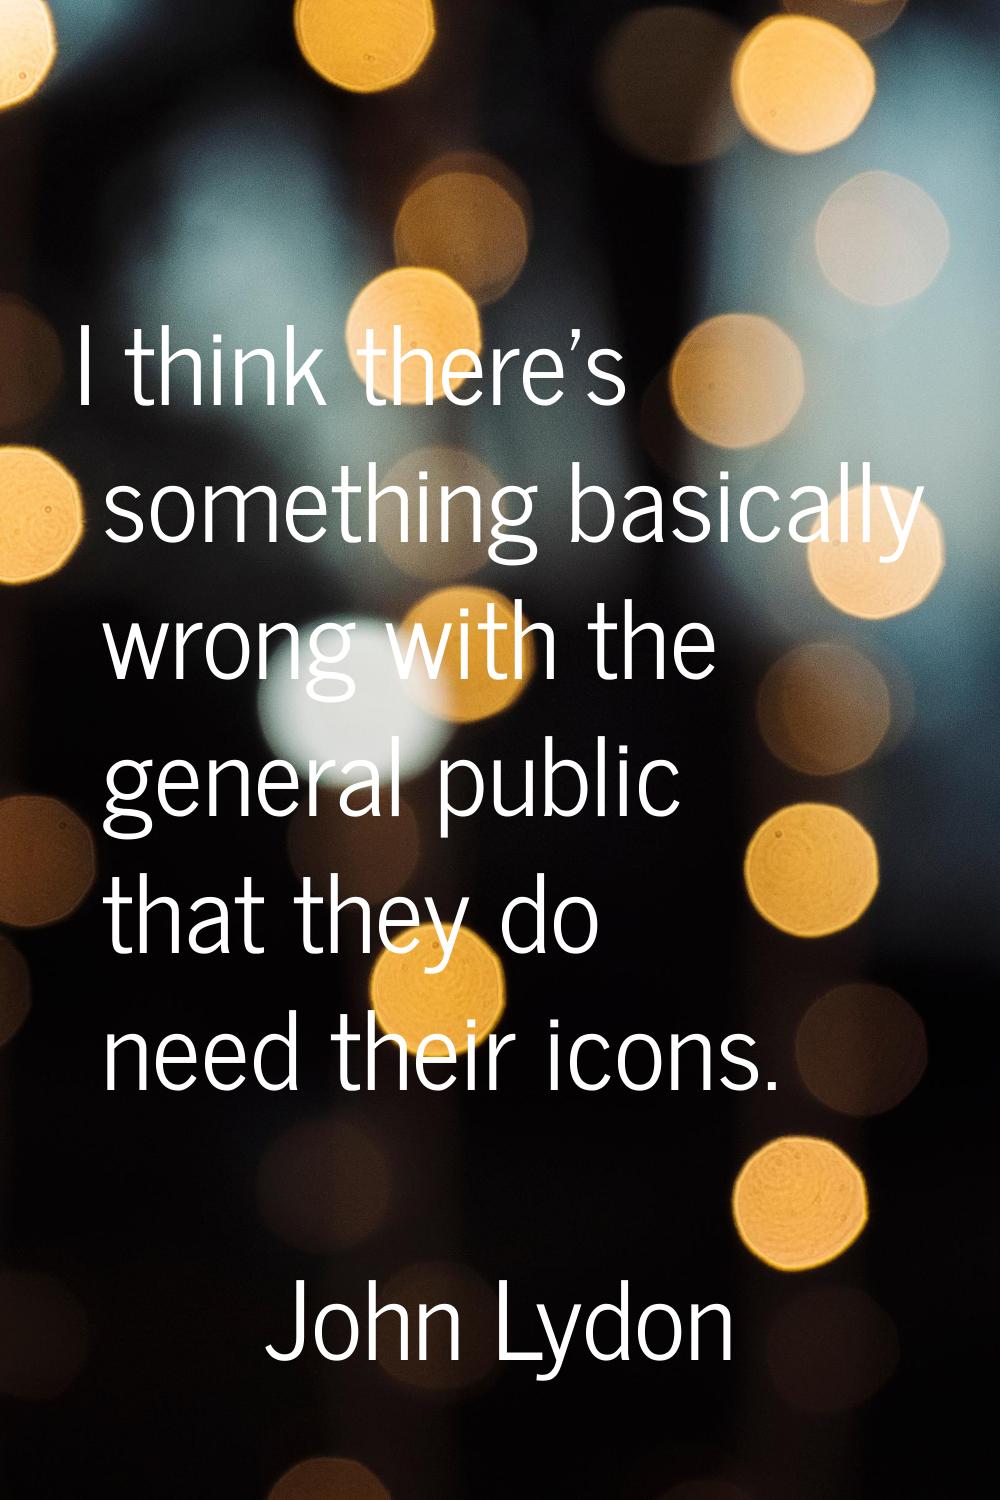 I think there's something basically wrong with the general public that they do need their icons.